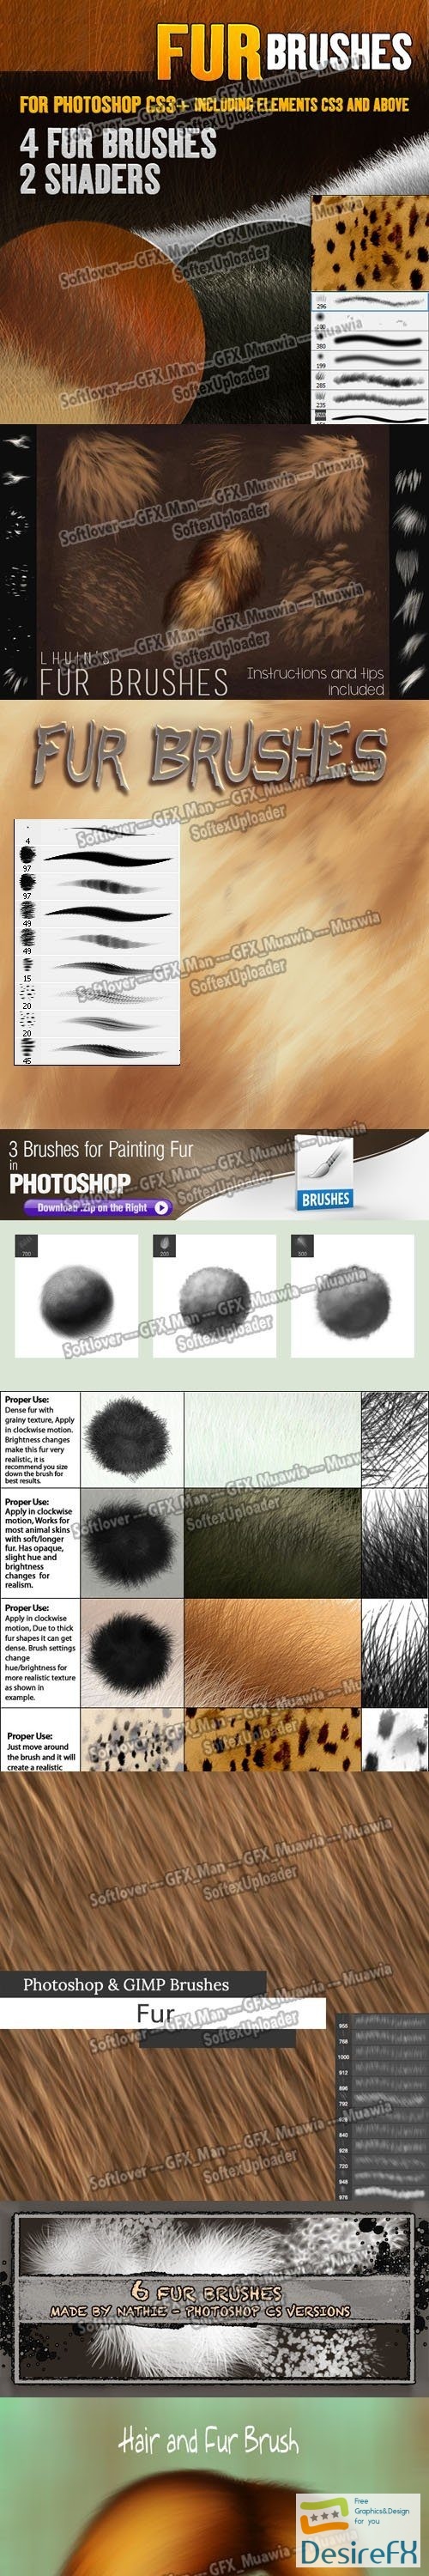 Amazing Collection of Fur Brushes for Photoshop